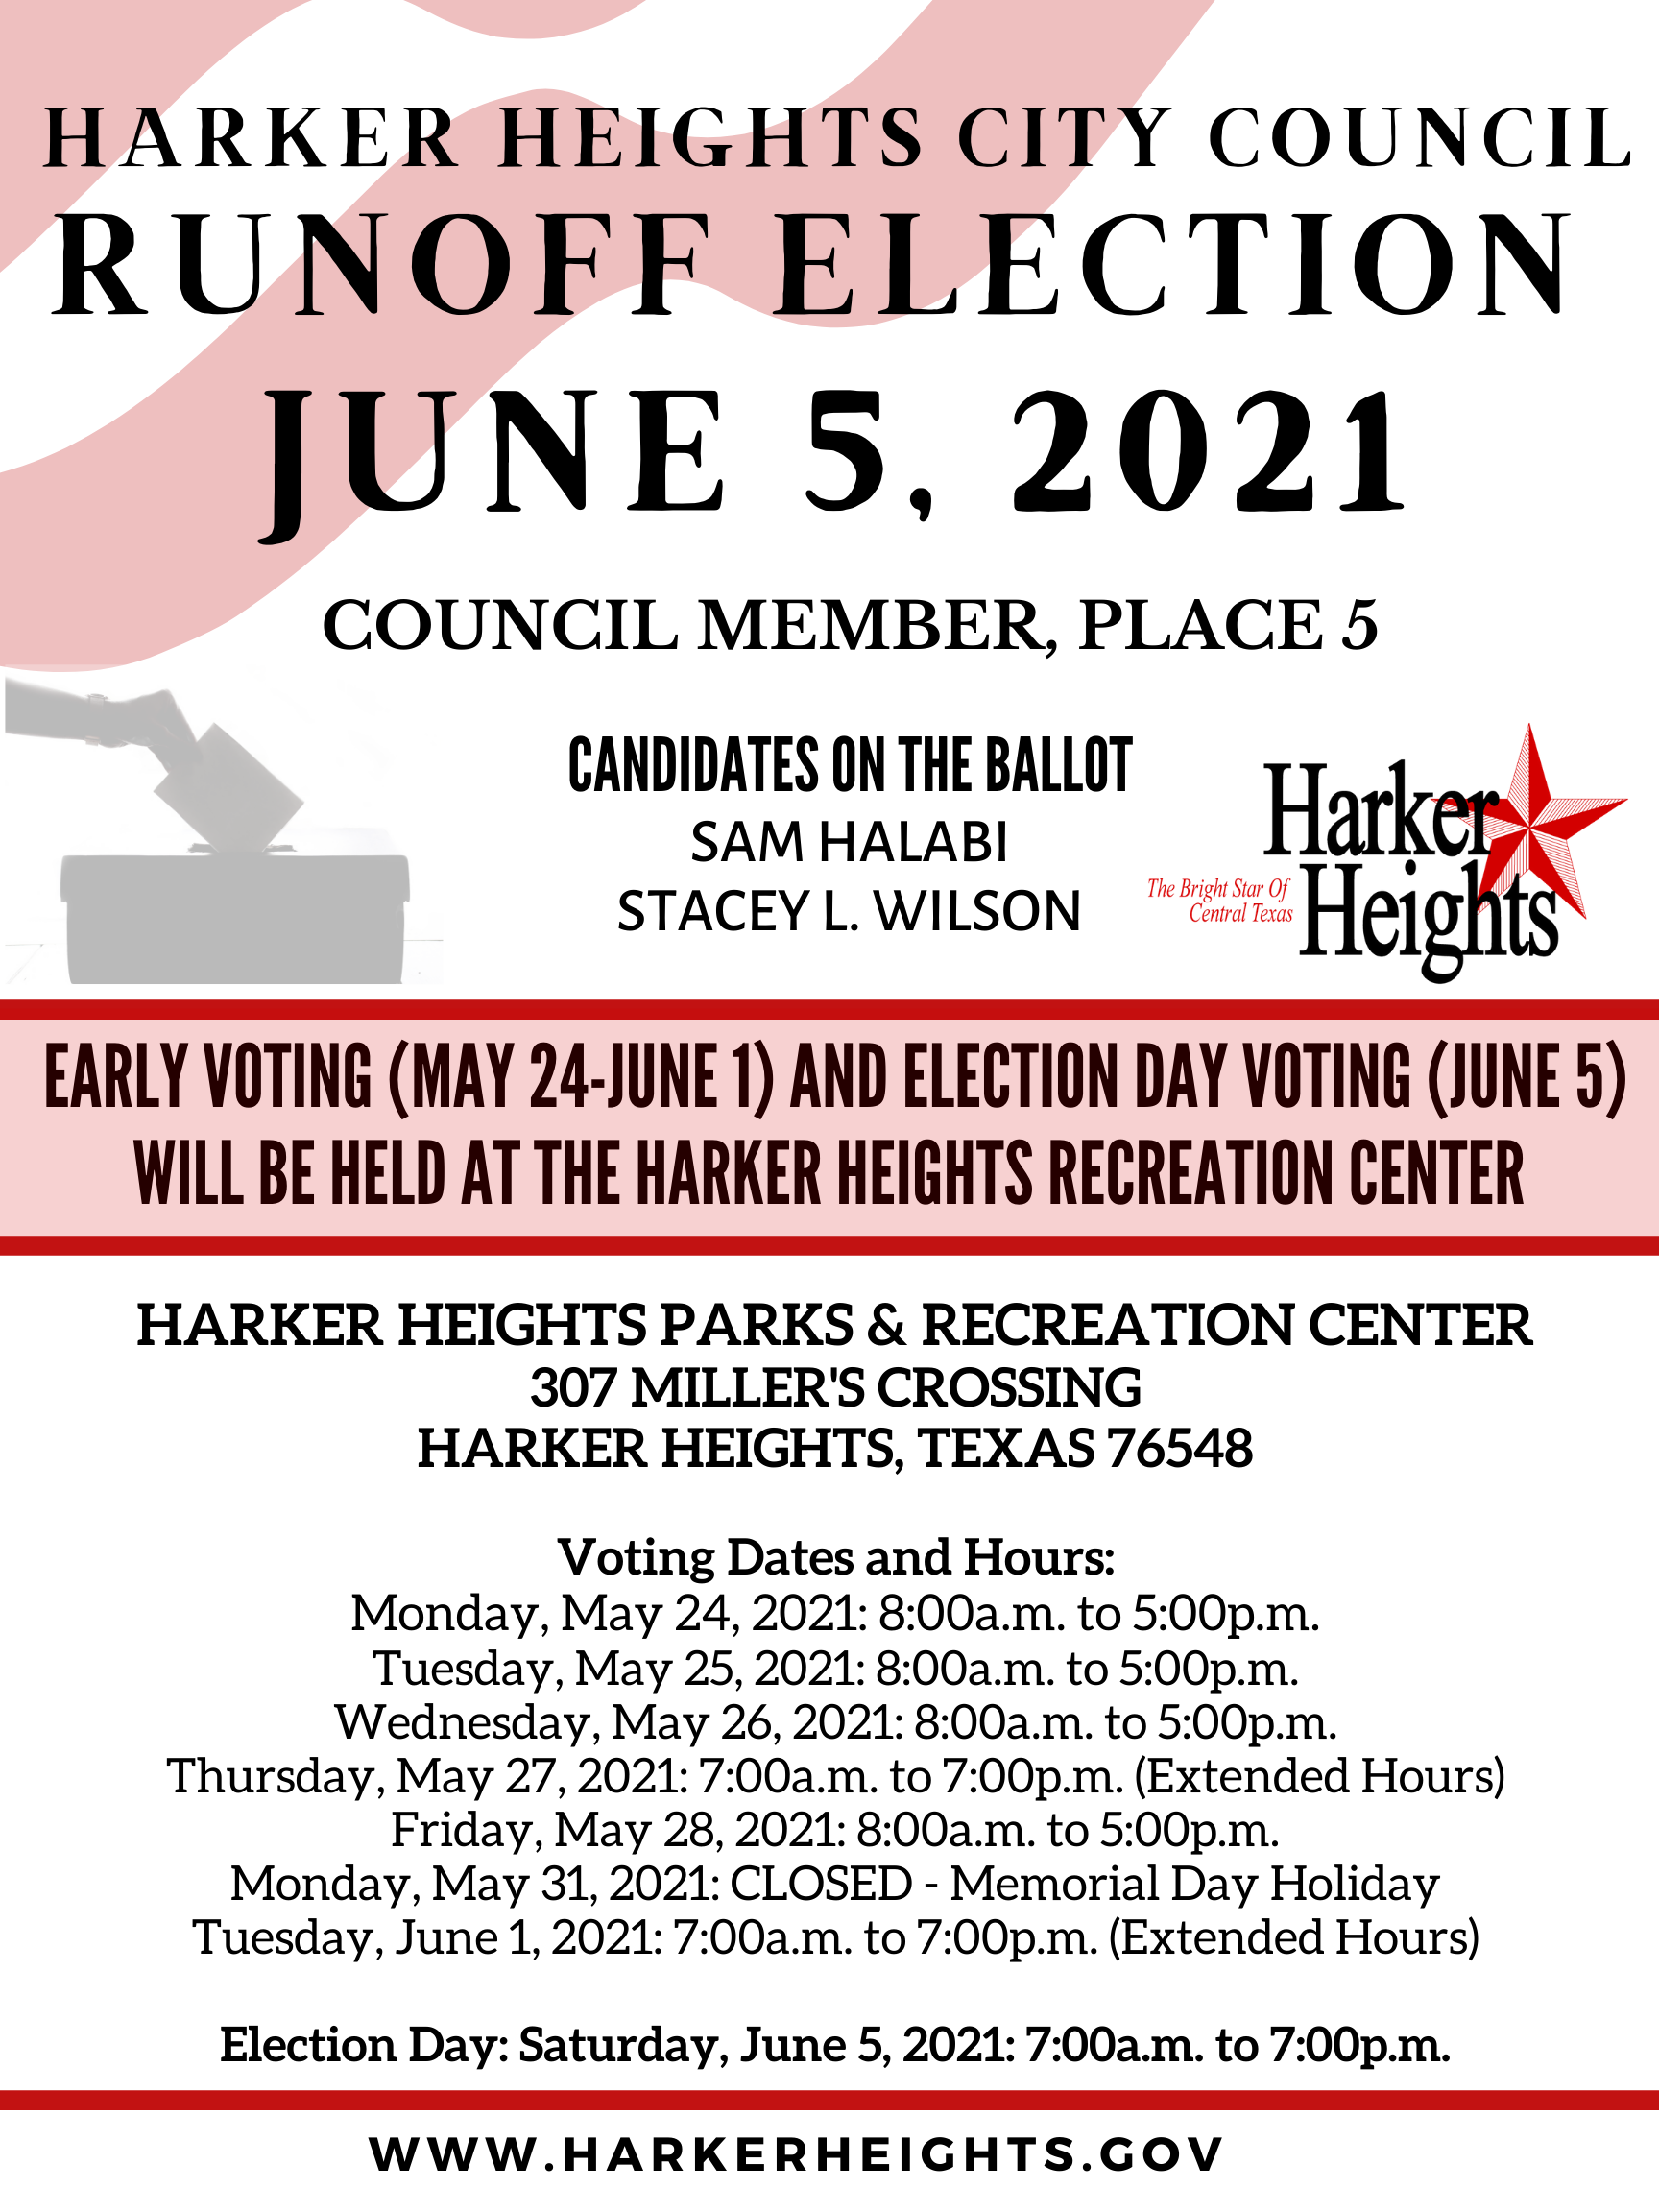 City of Harker Heights Runoff Election 2021